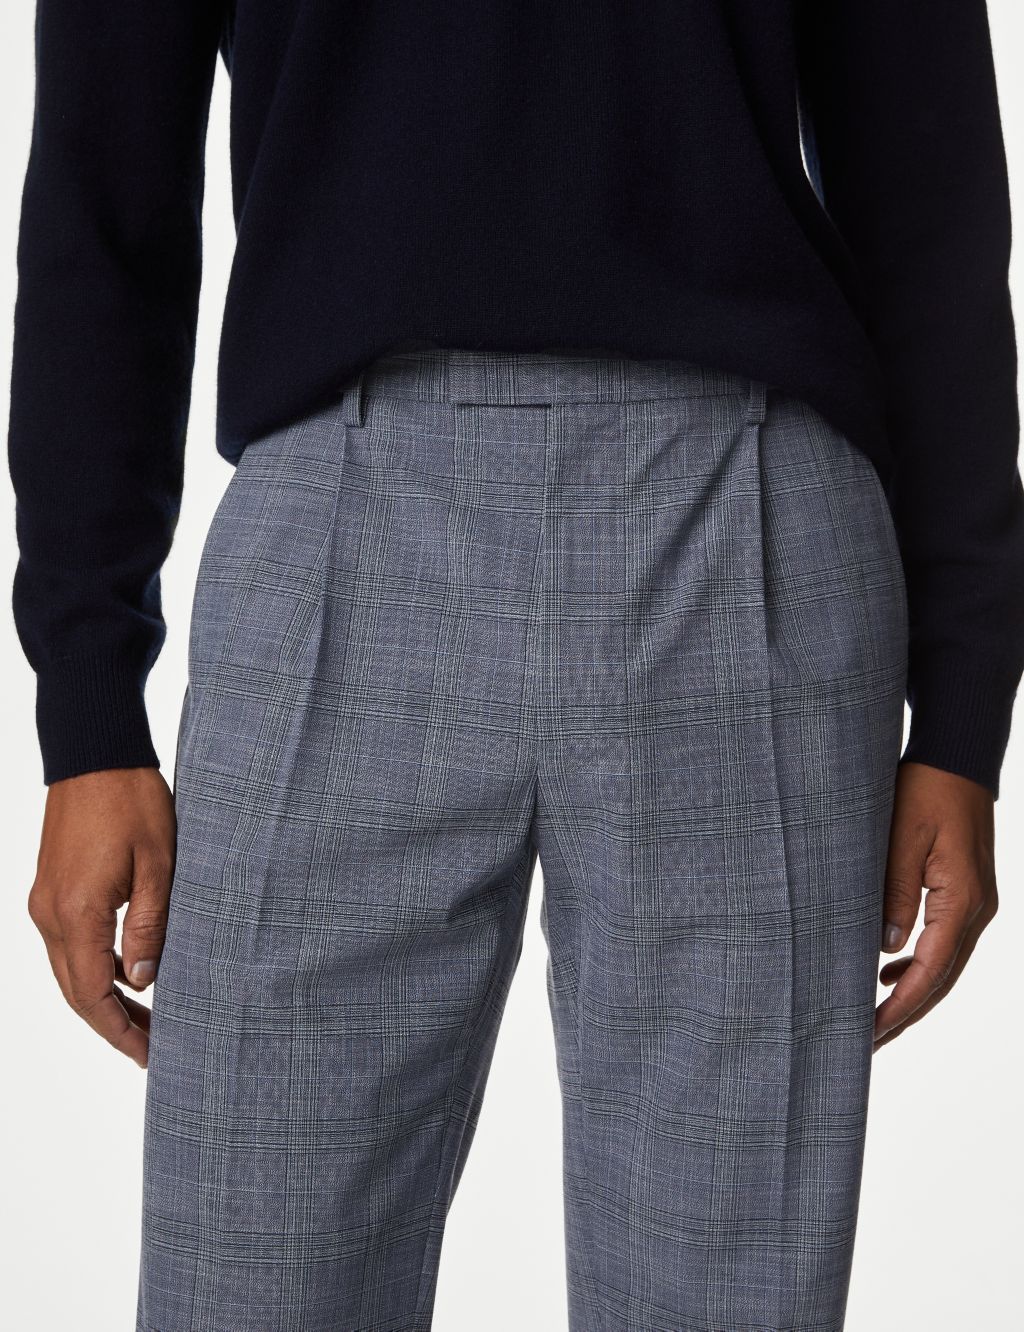 Single Pleat Checked Stretch Trousers image 8